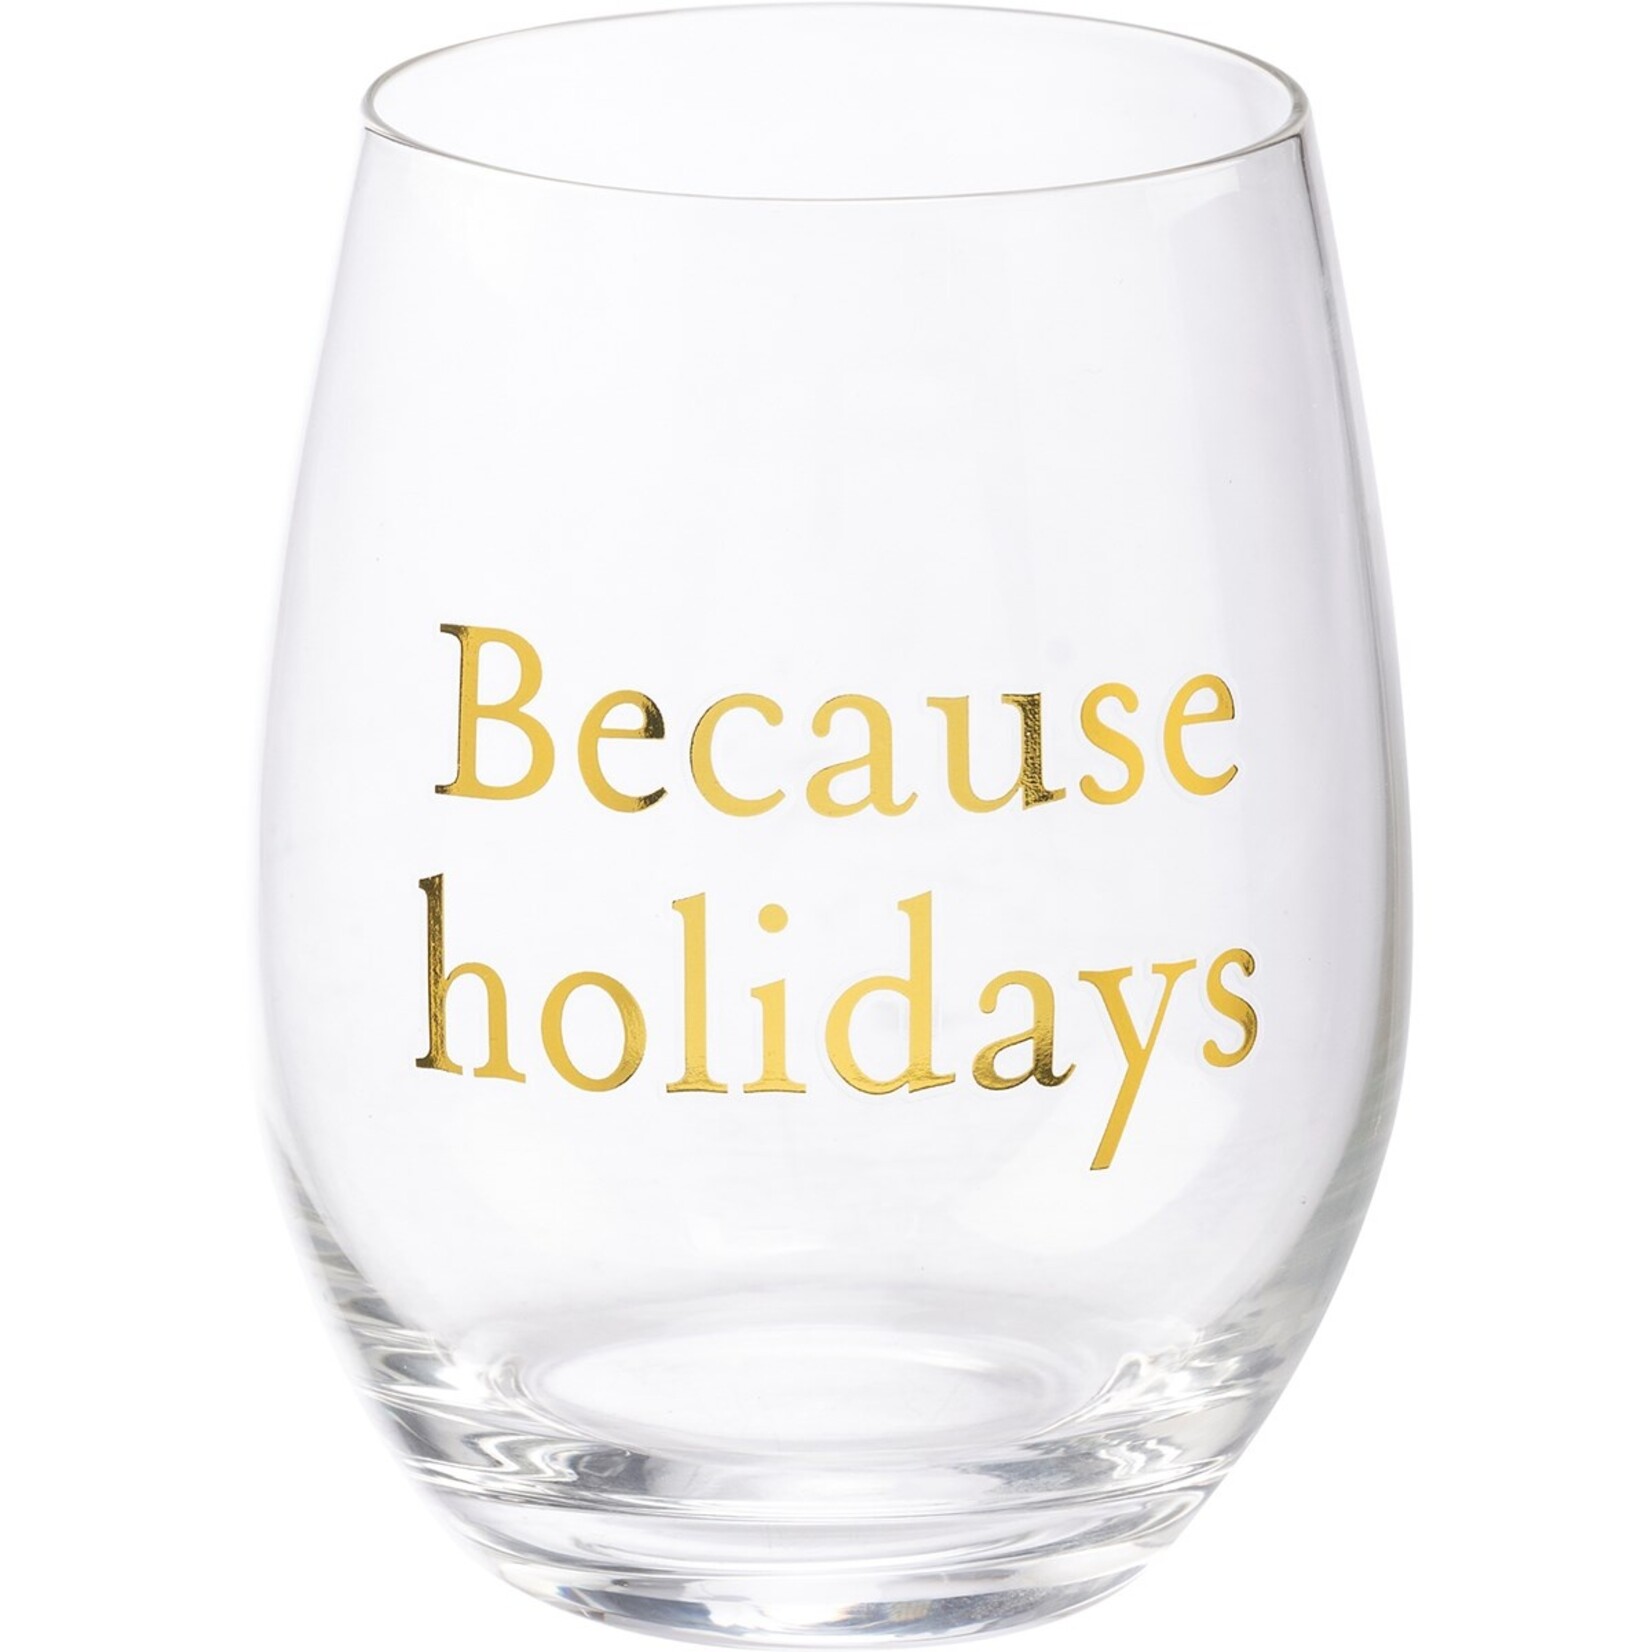 Primitives by Kathy Primitives by Kathy-Because Holidays Wine Glass